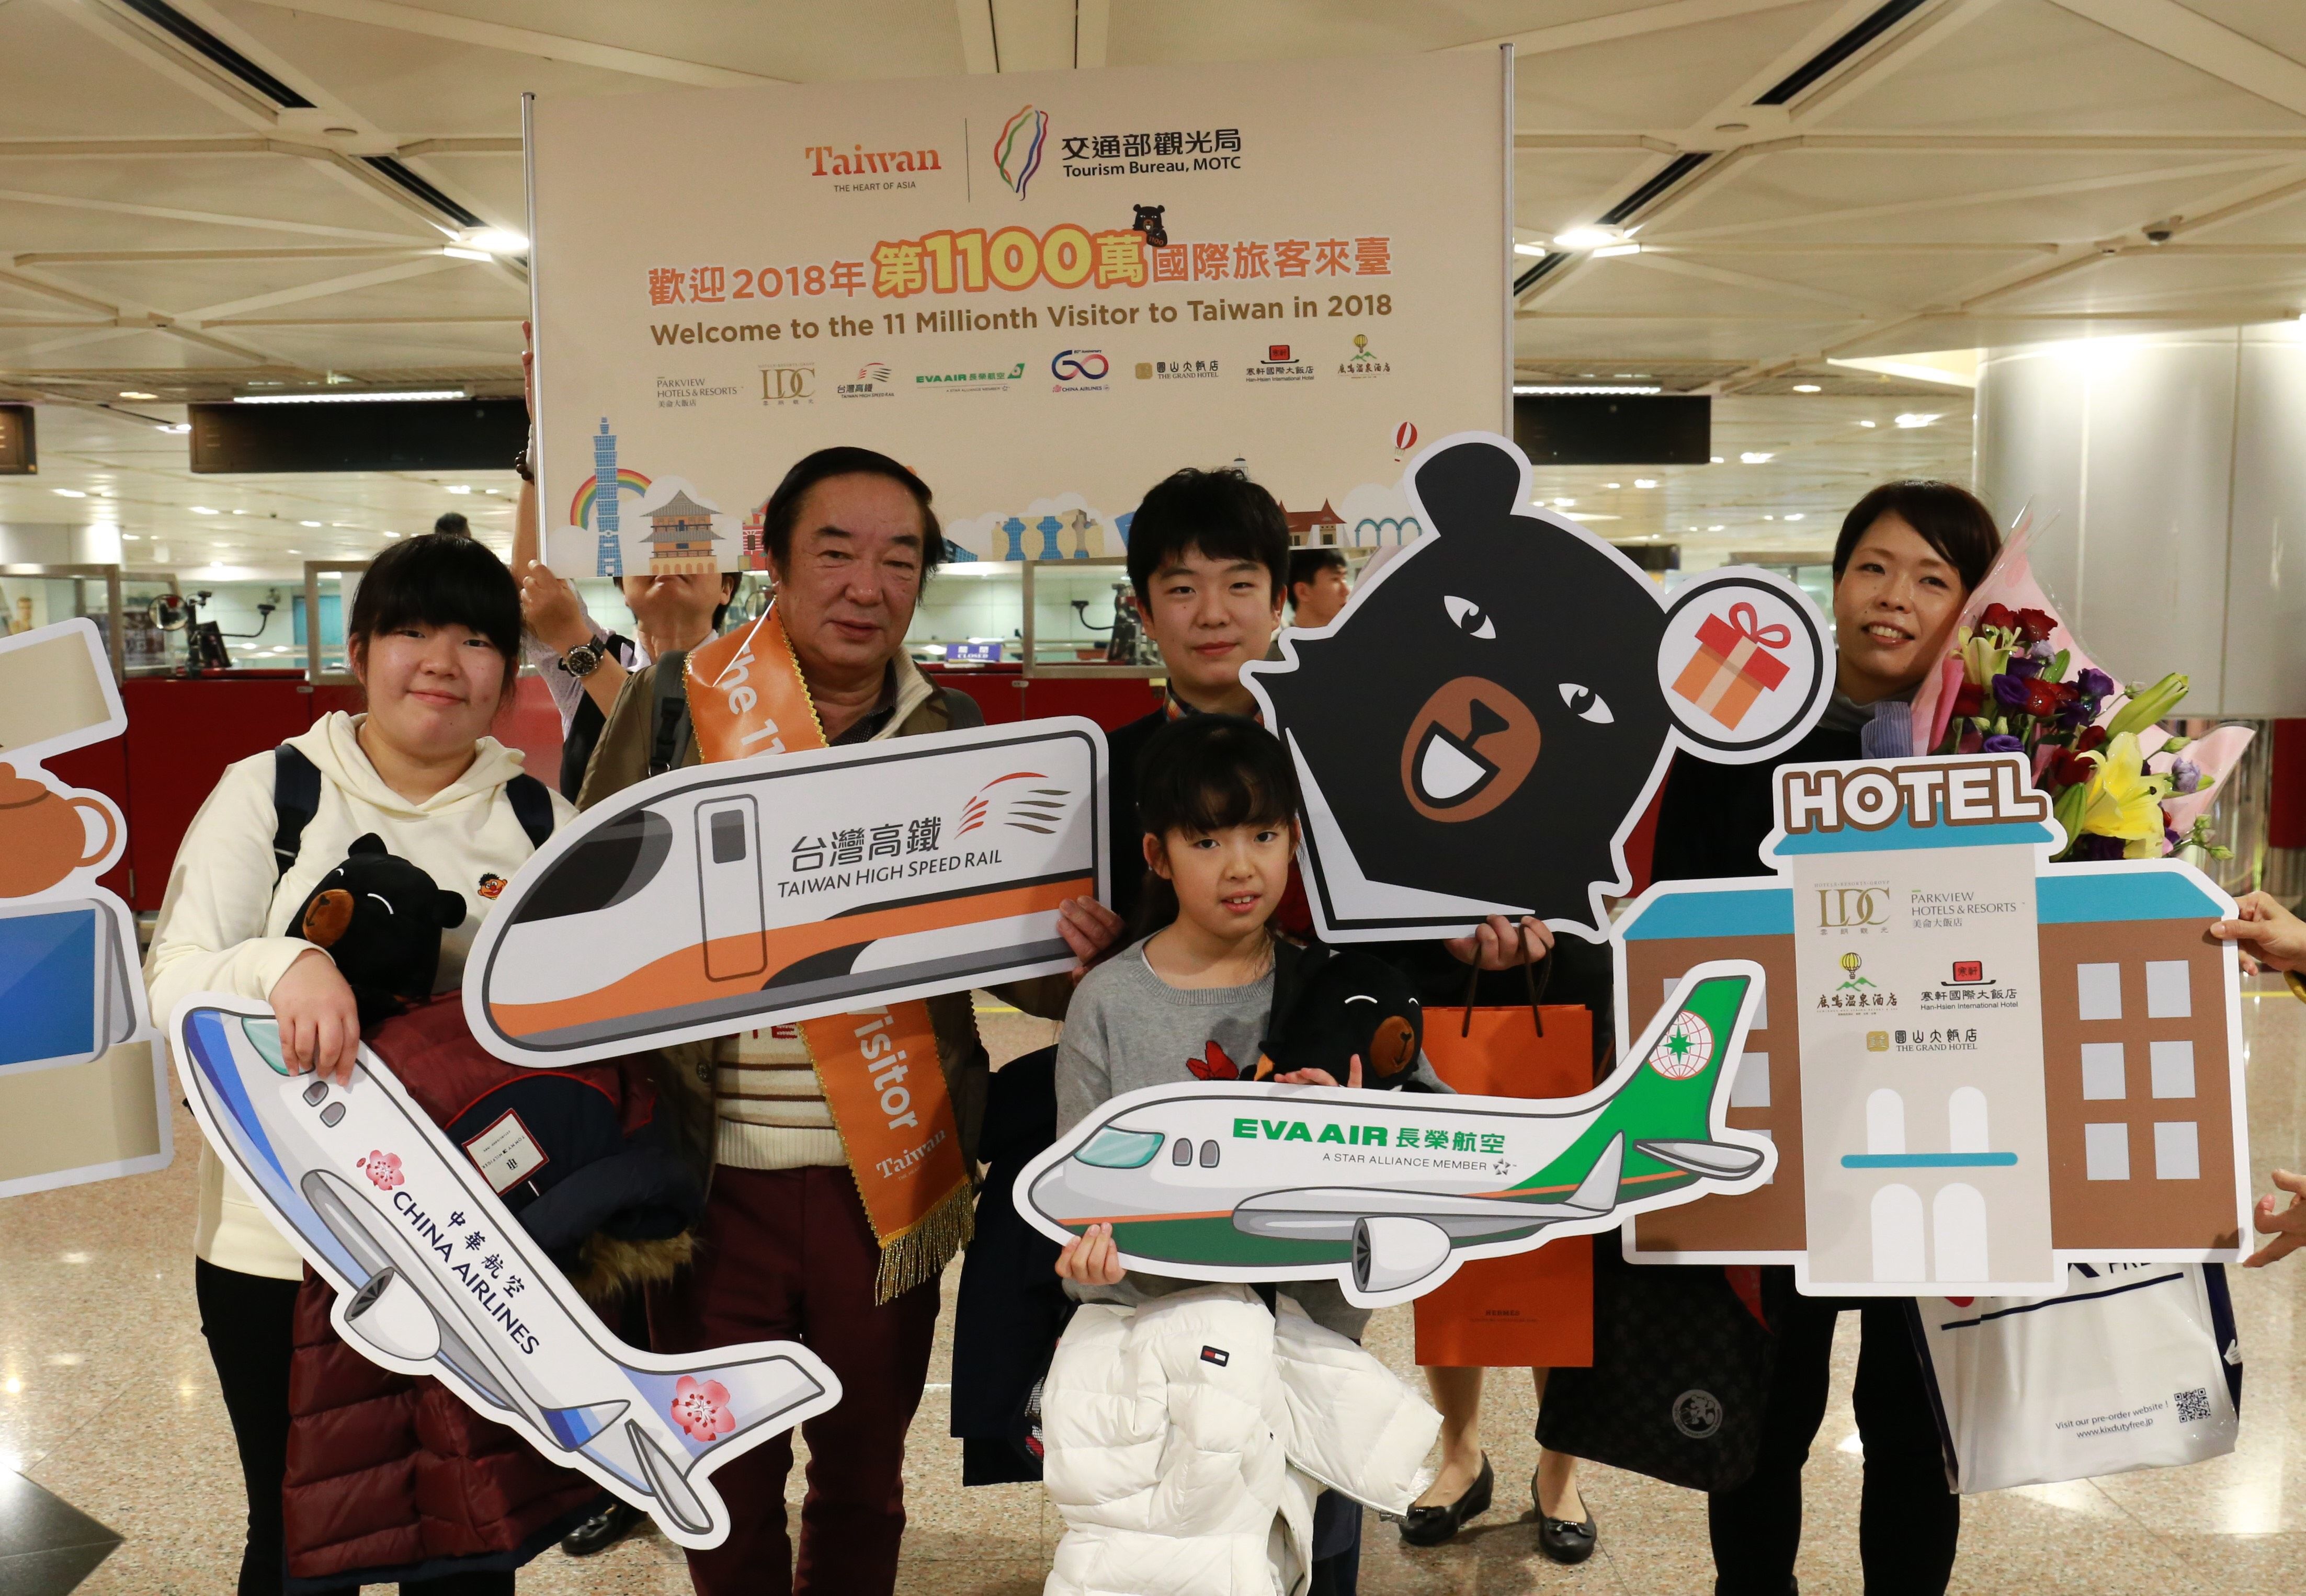 Taiwan’s 11 millionth visitor of 2018 Shinobu Nishikawa (second left) and family members are all smiles Dec. 30 at Taiwan Taoyuan International Airport. (Courtesy of Tourism Bureau)